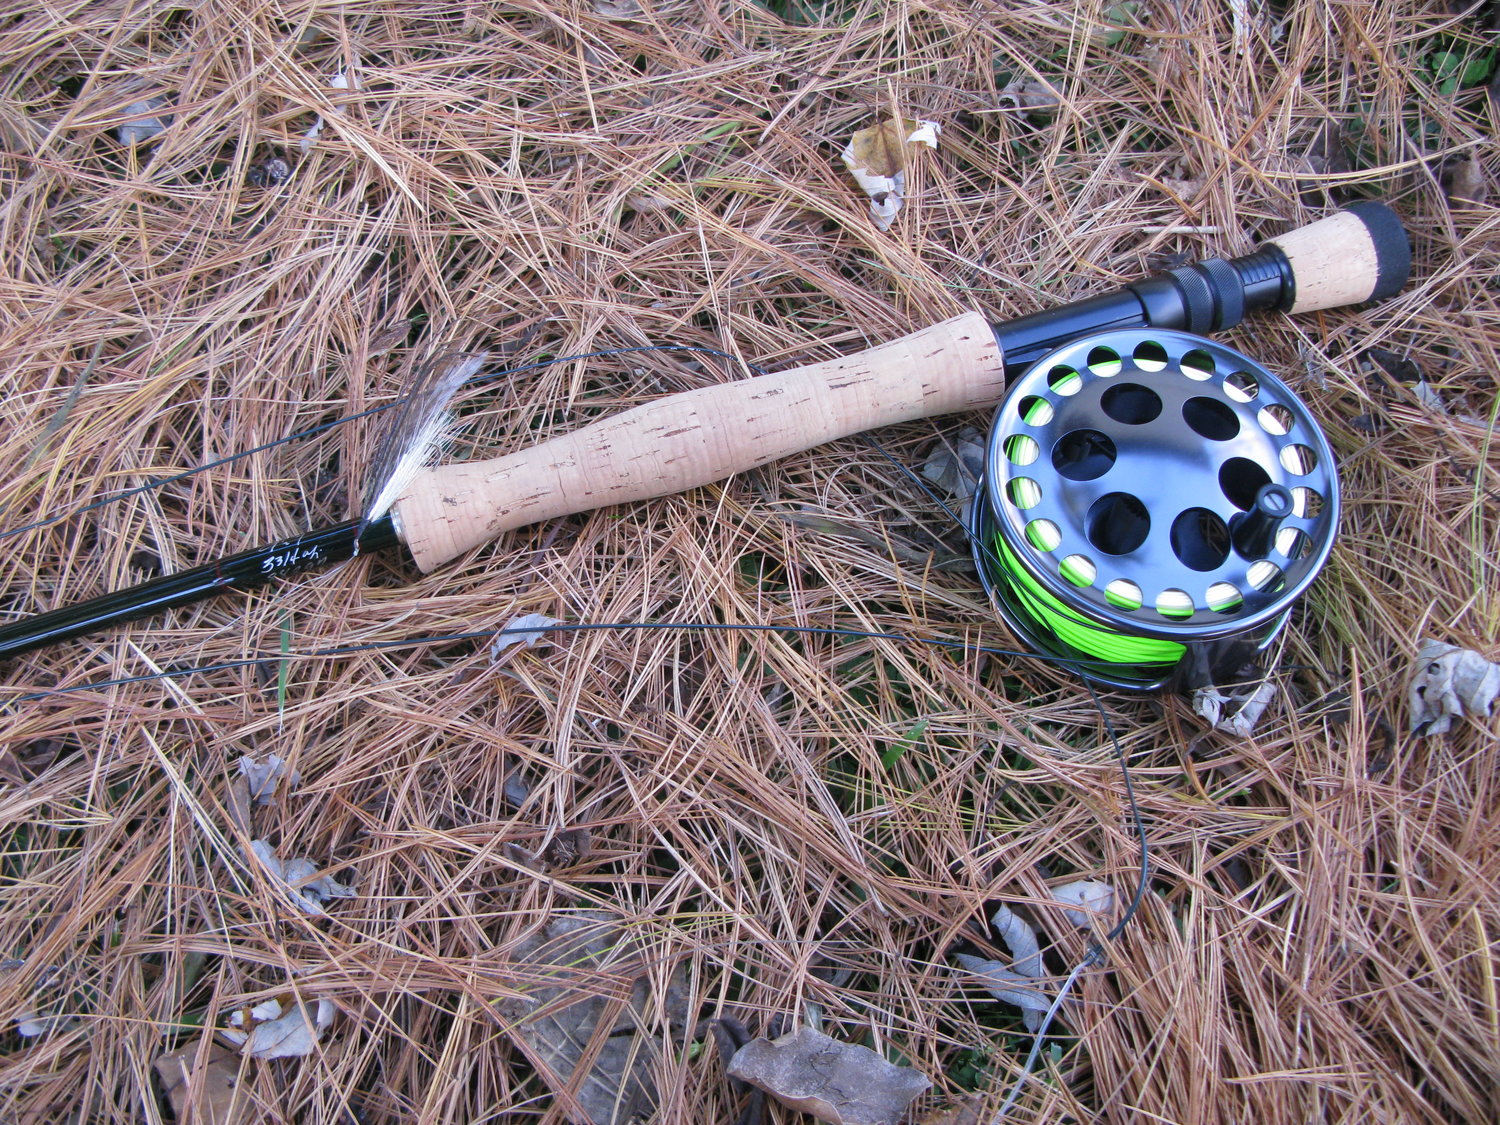 A stout fly rod and large streamer fly: the tools required to land large, migrating brown trout.